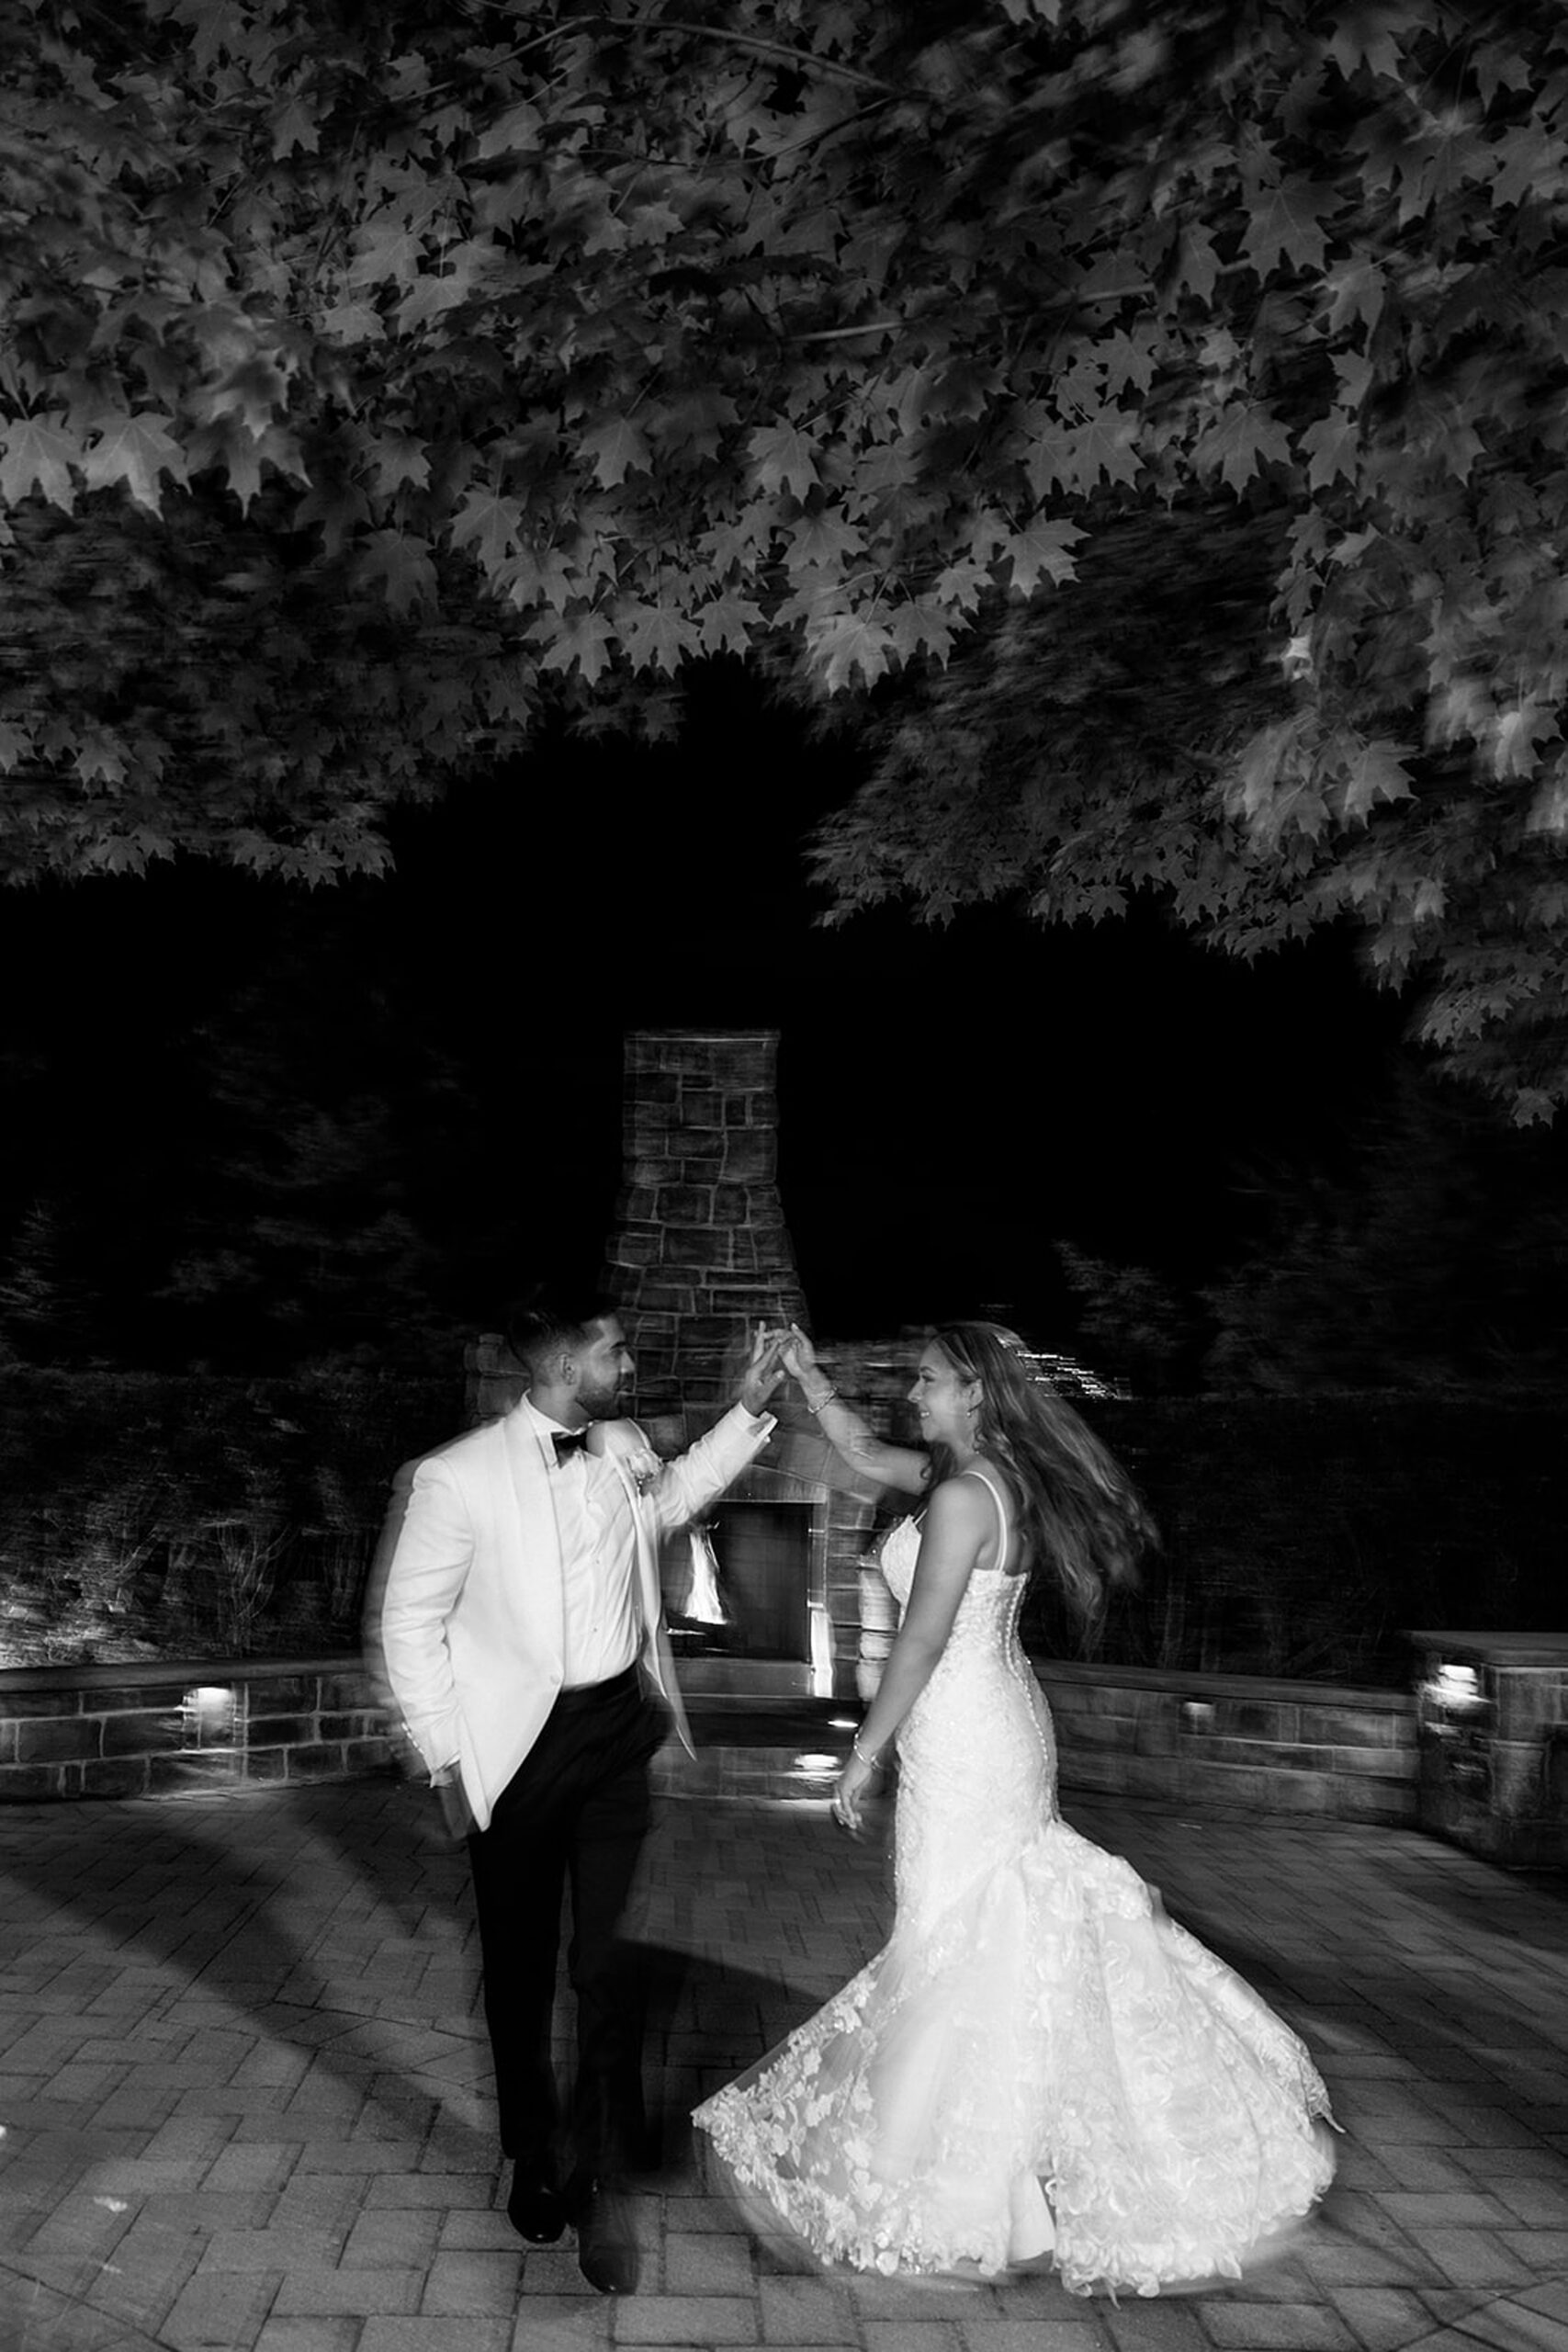 Newlyweds dance under a maple tree on a stone paved patio with a brick oven